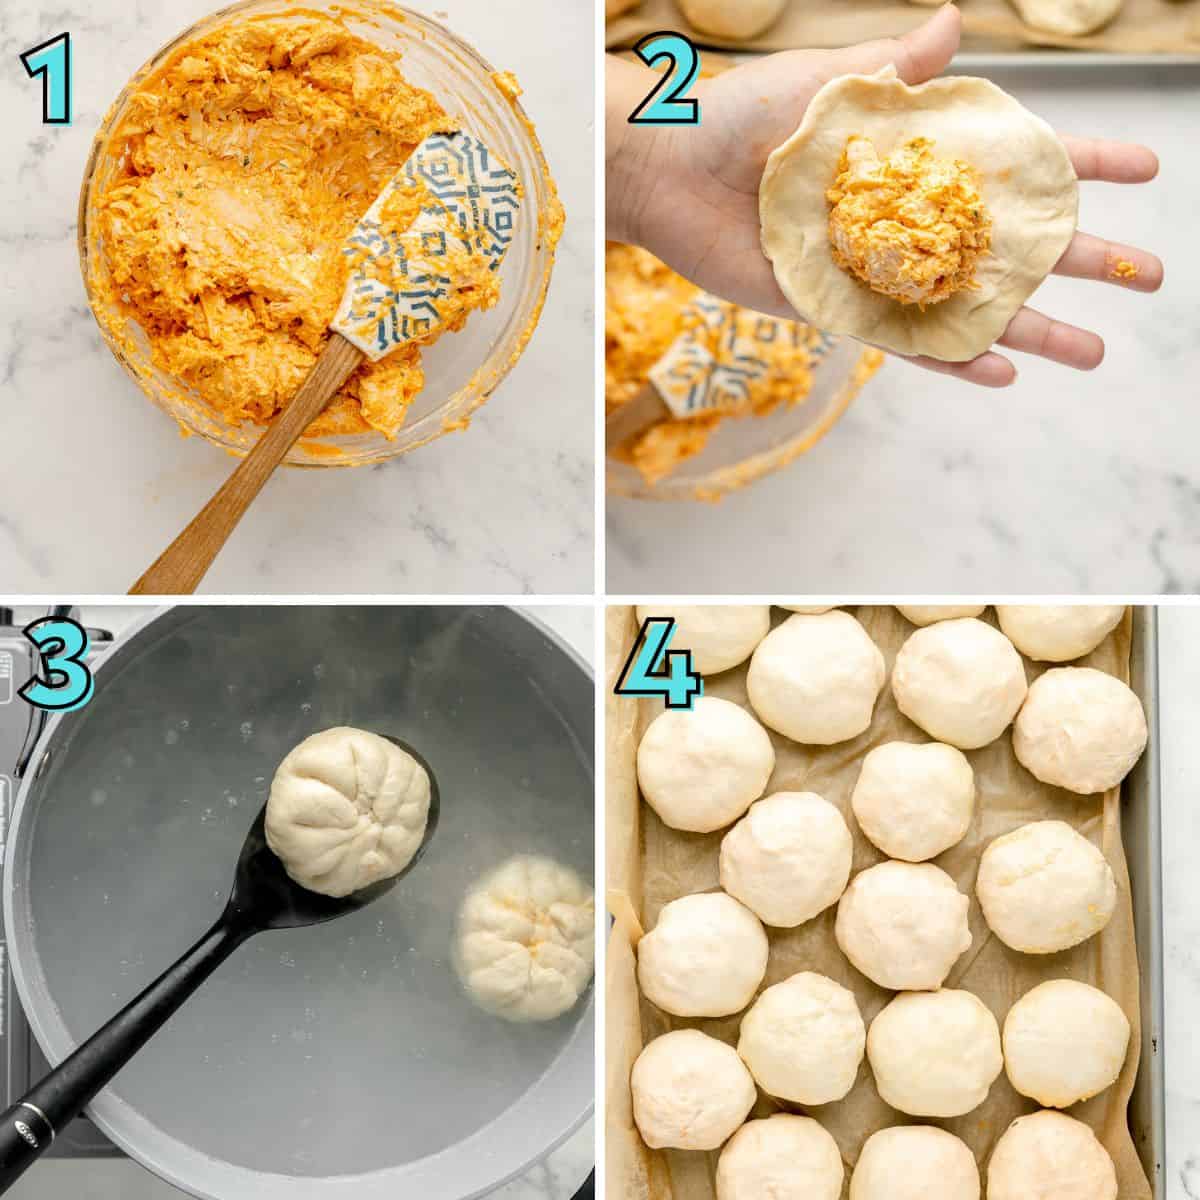 Step by step recipe instructions in a collage.